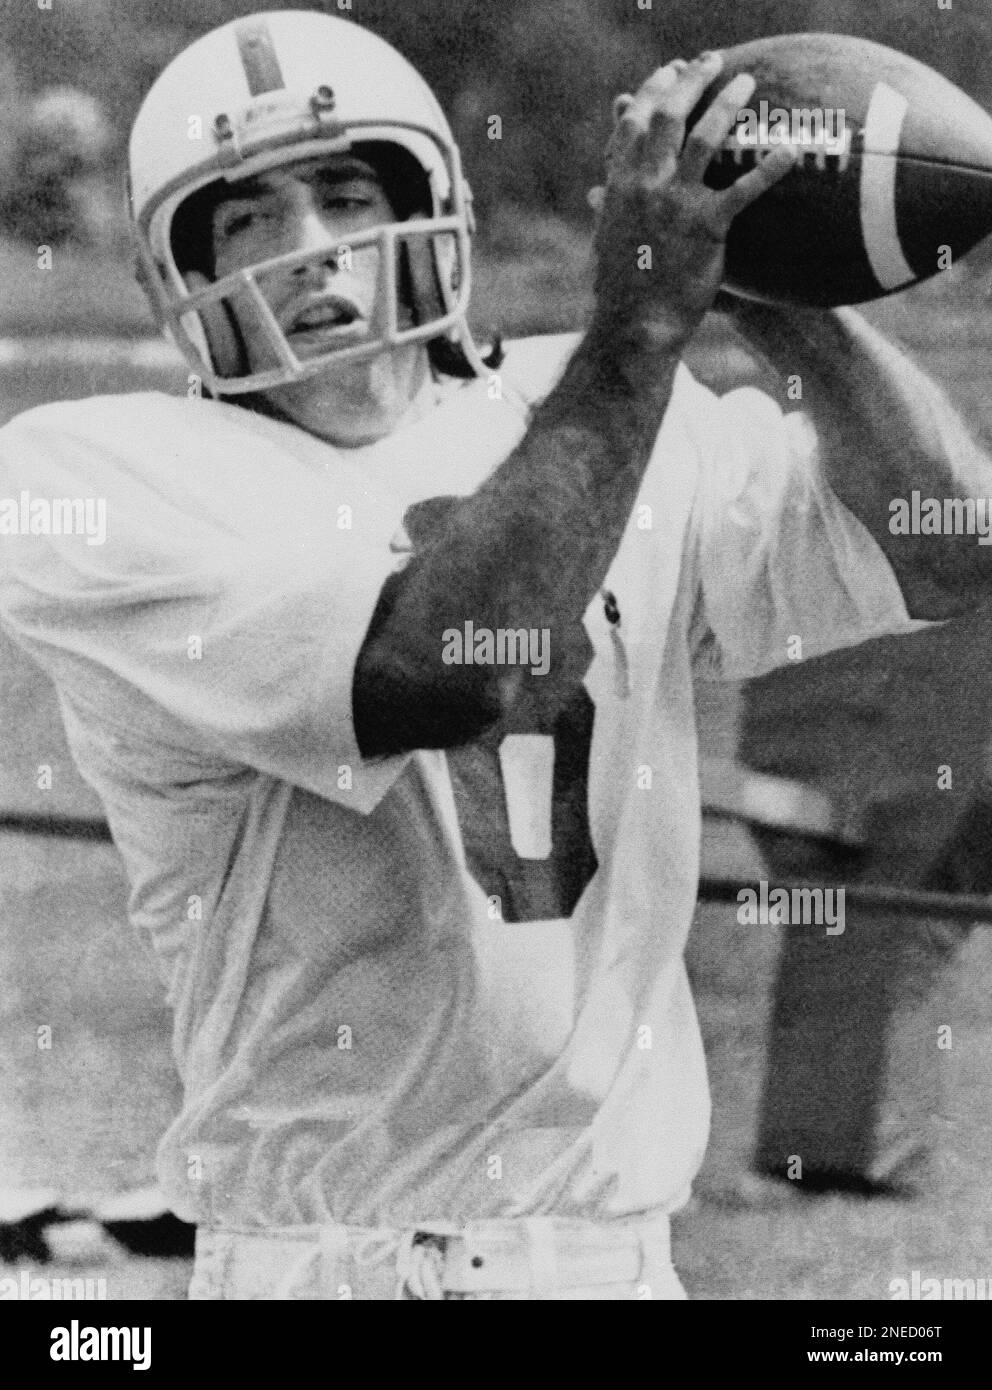 Baltimore Colt wide-receiver Tim Berra, the son of New York Mets Manager Yogi  Berra, is shown doing some catching and throwing himself during practice  with the team in Baltimore on August 6